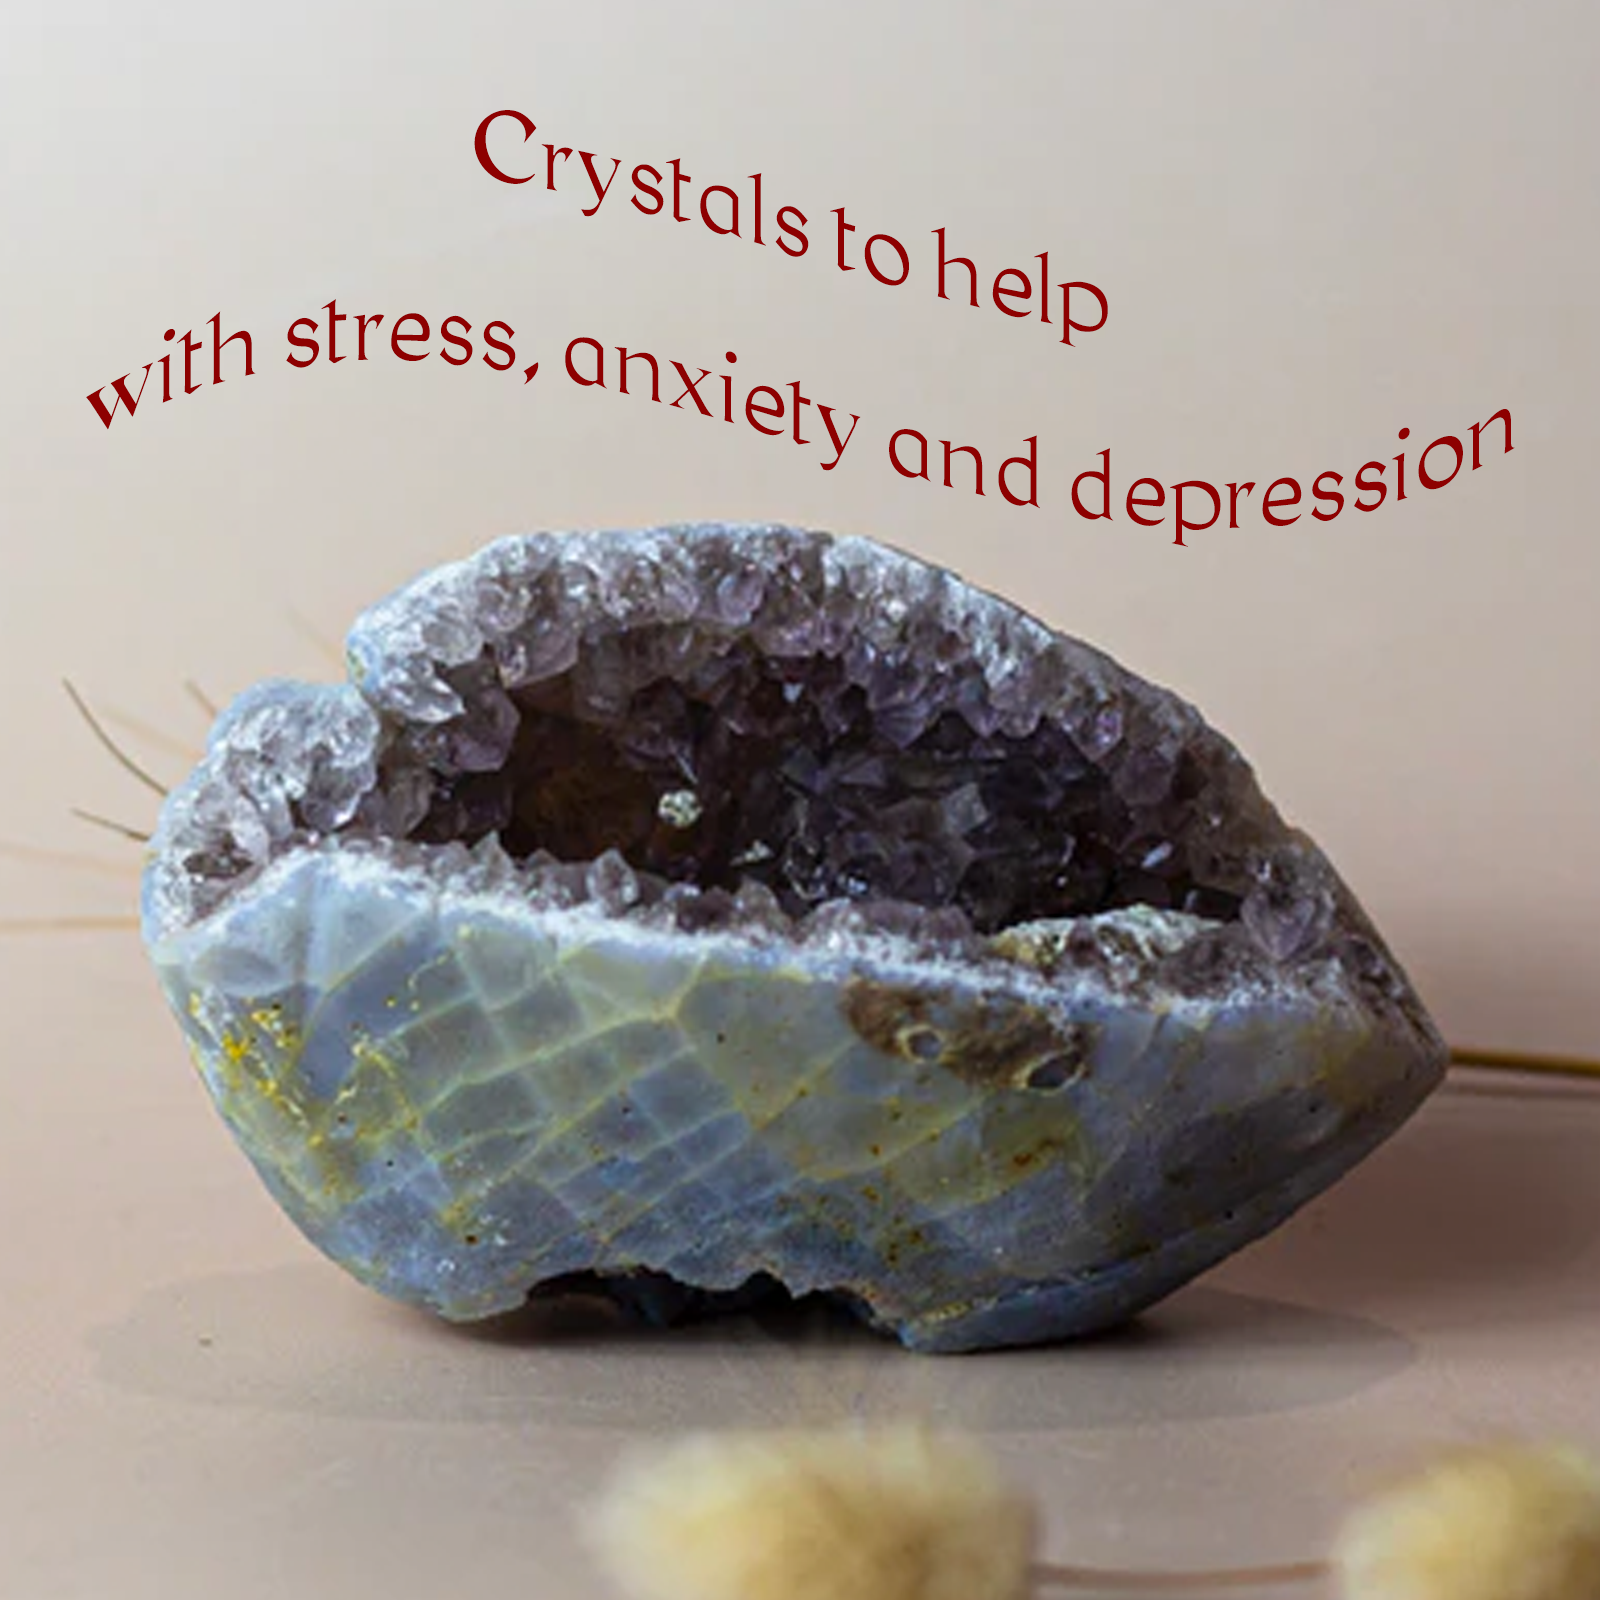 Crystals to help with stress, anxiety and depression